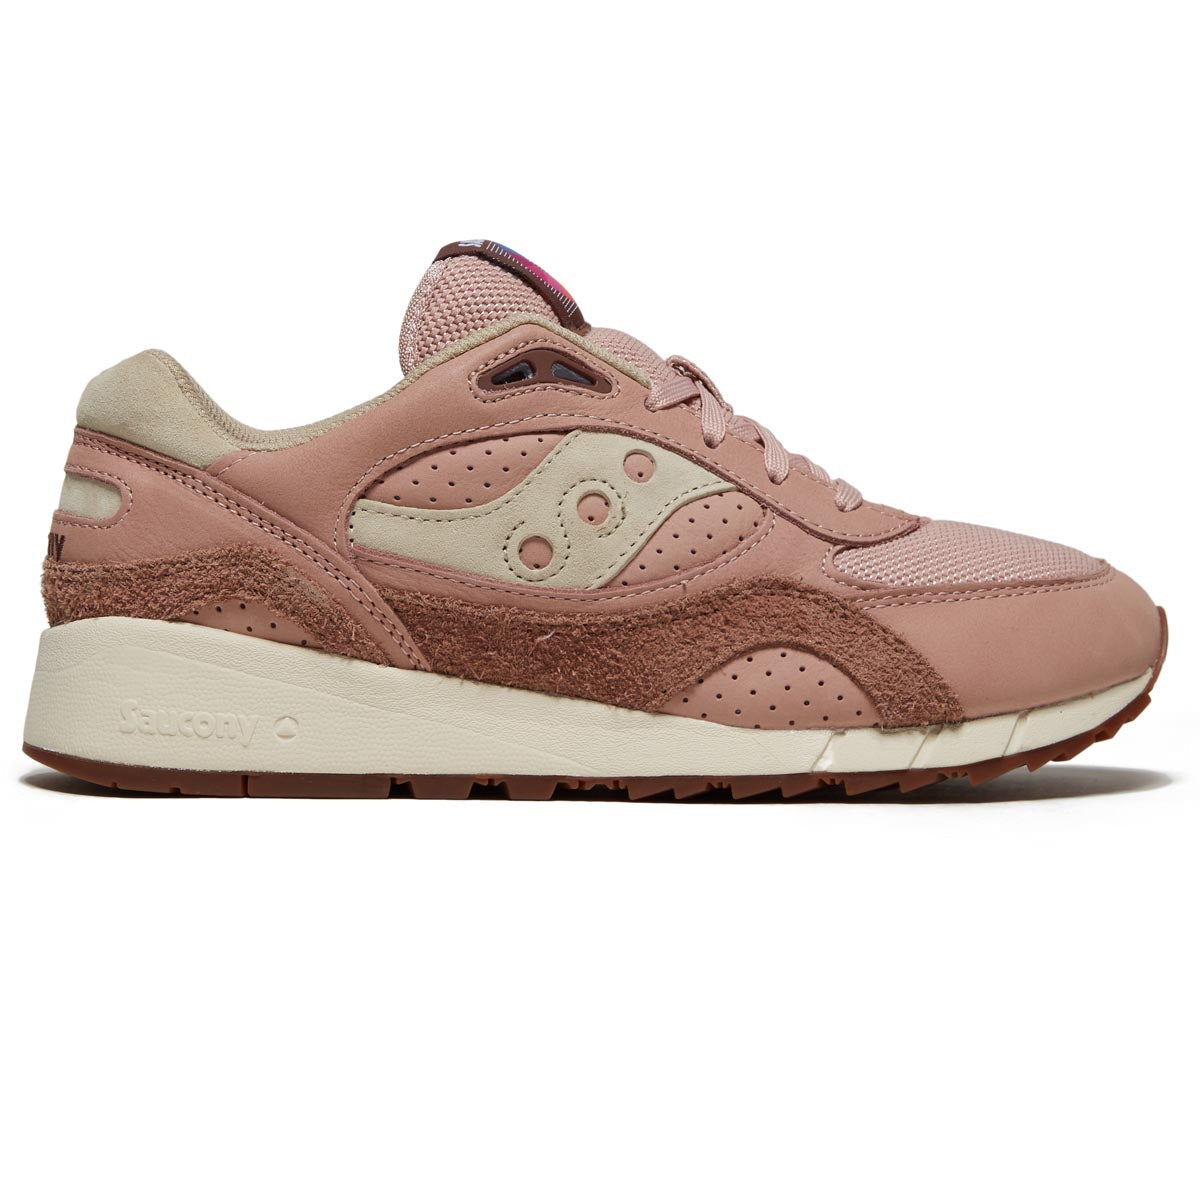 Saucony Shadow 6000 Shoes - Rose/Brown image 1